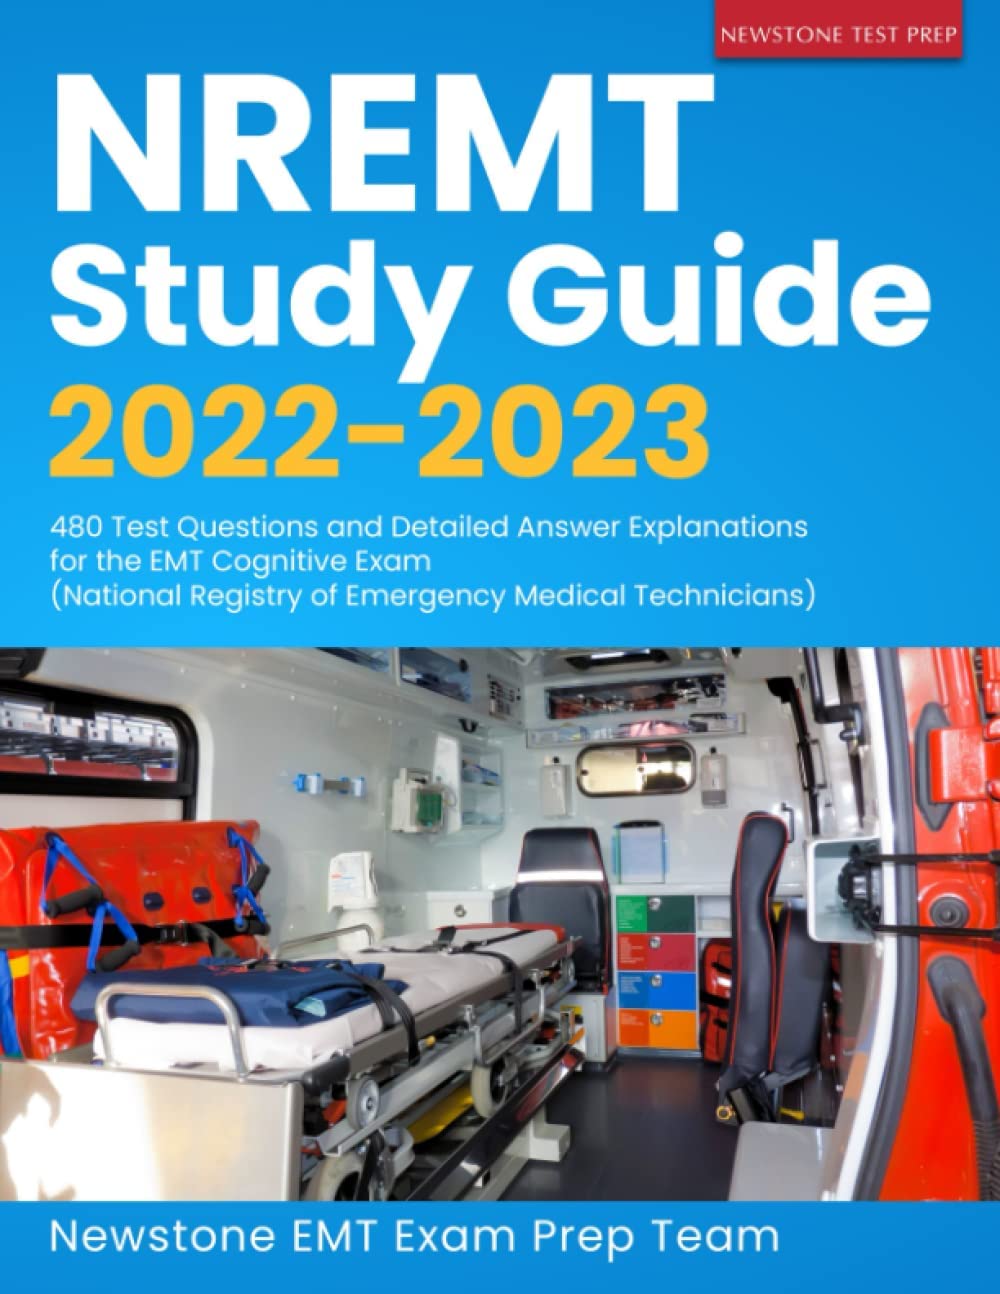 NREMT Study Guide 2022-2023: 480 Test Questions and Detailed Answer Explanations for the EMT Cognitive Exam (National Registry of Emergency Medical Technicians)